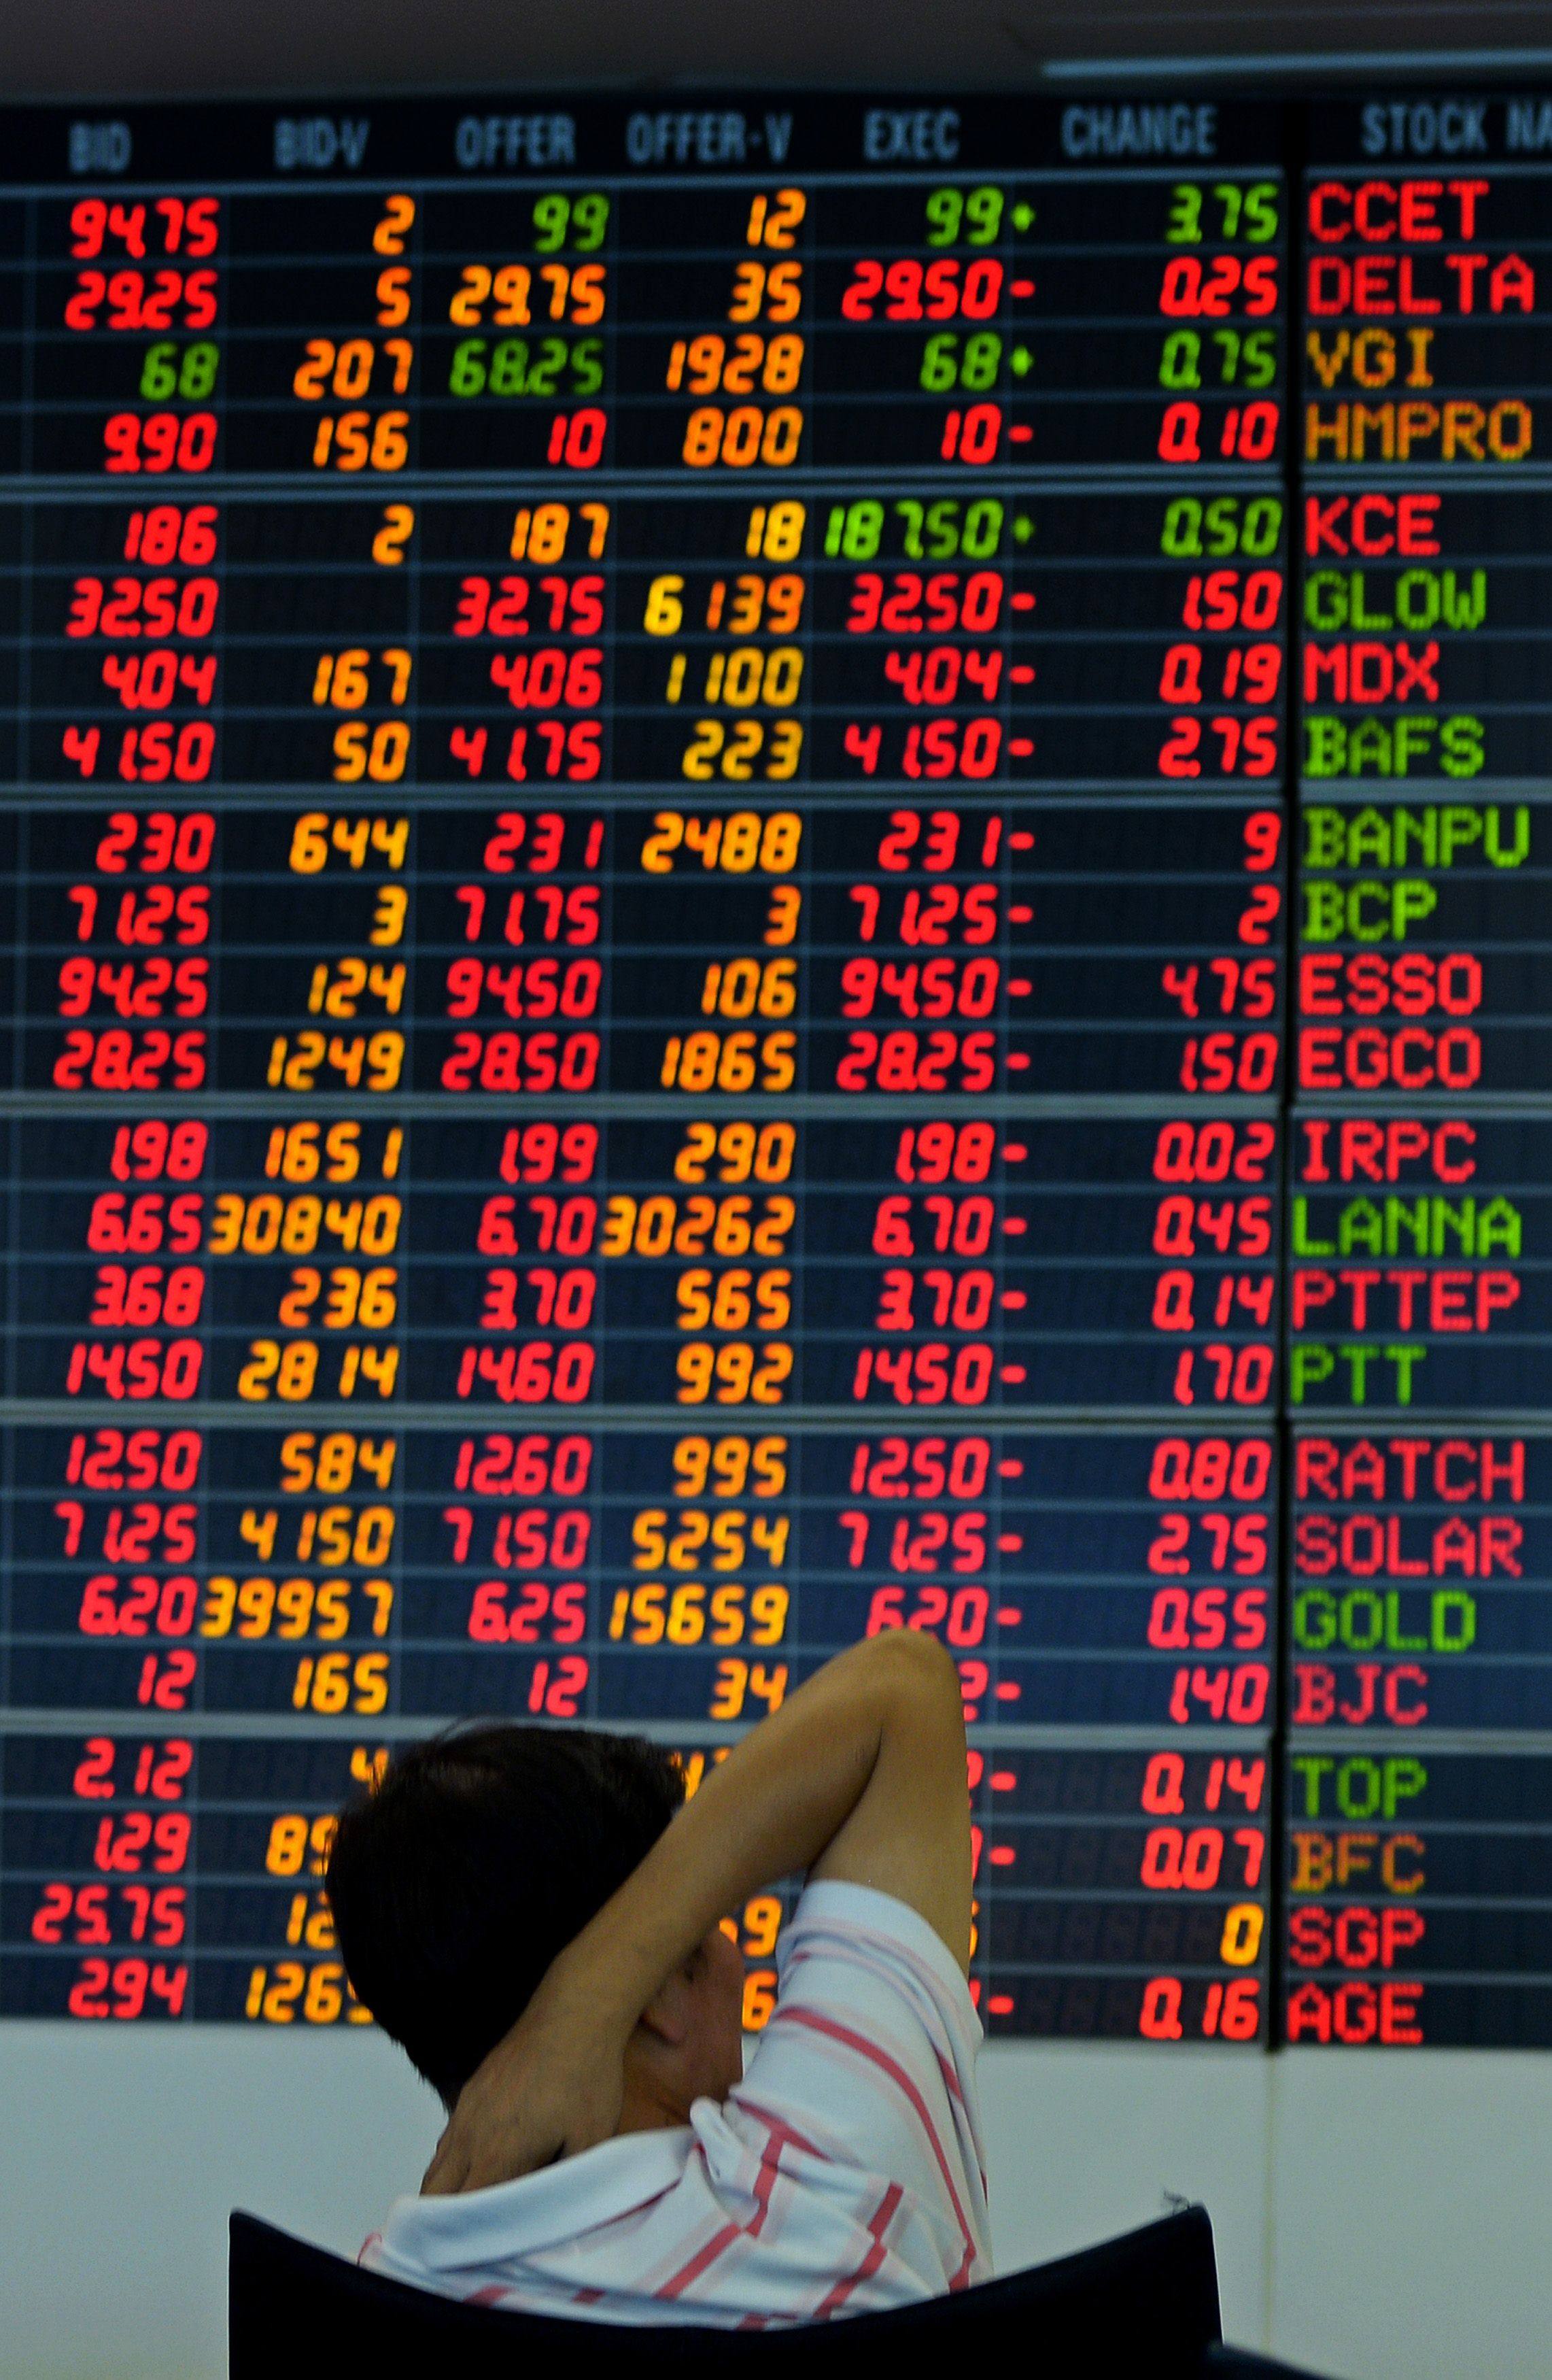 A Thai investor looks at an electronic display of share prices at a private trading company in Bangkok. Photo: AFP